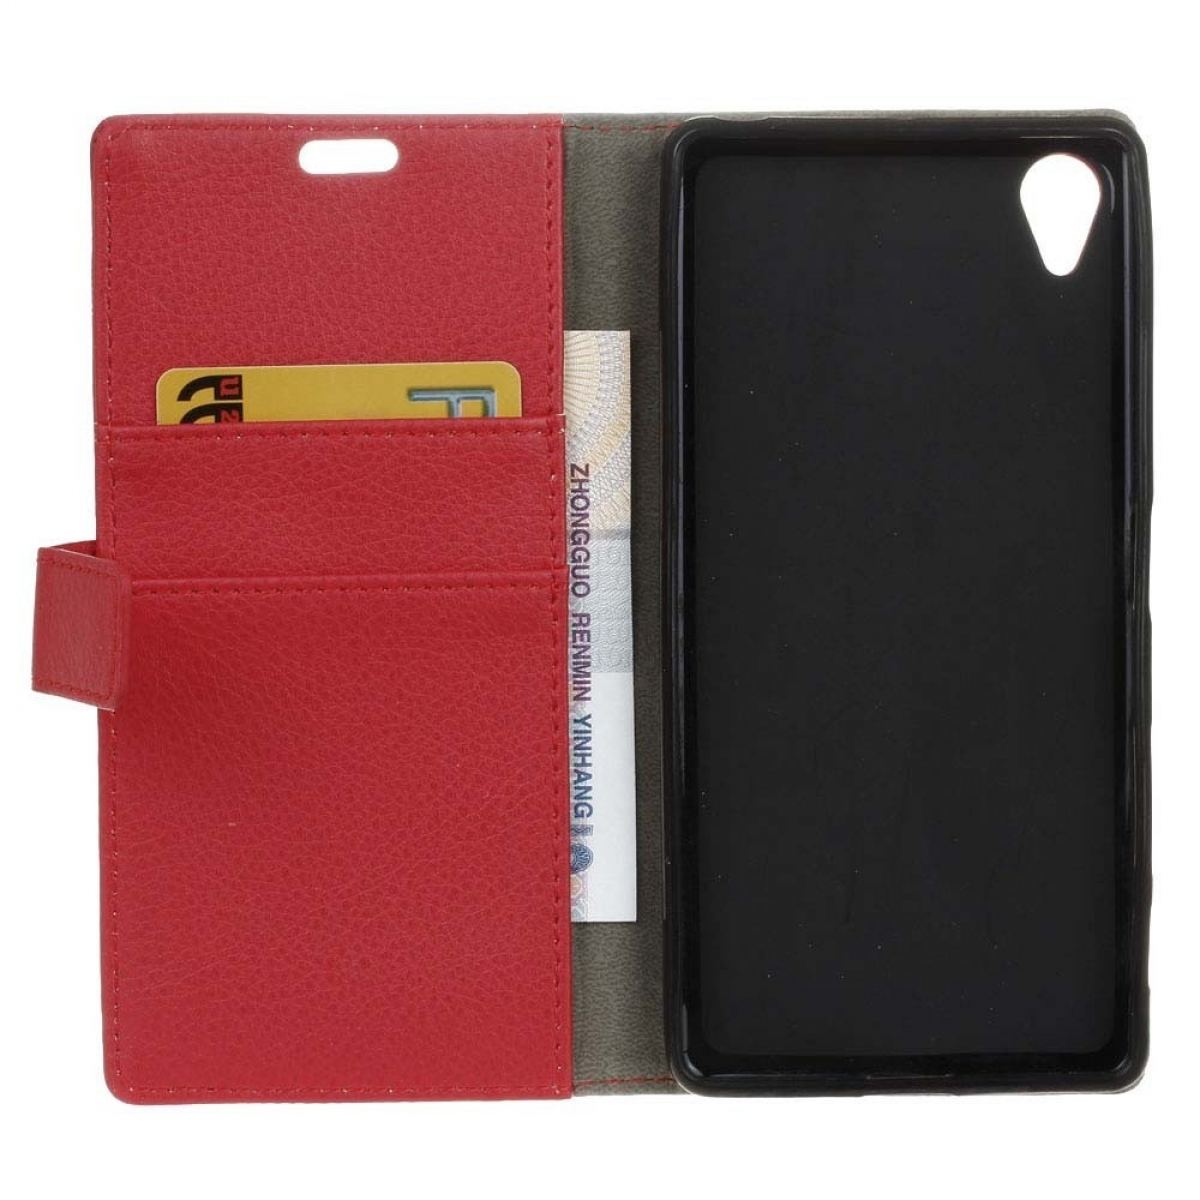 CASEONLINE Live, Klappbare Zenfone Asus, Bookcover, Rot - Rot,